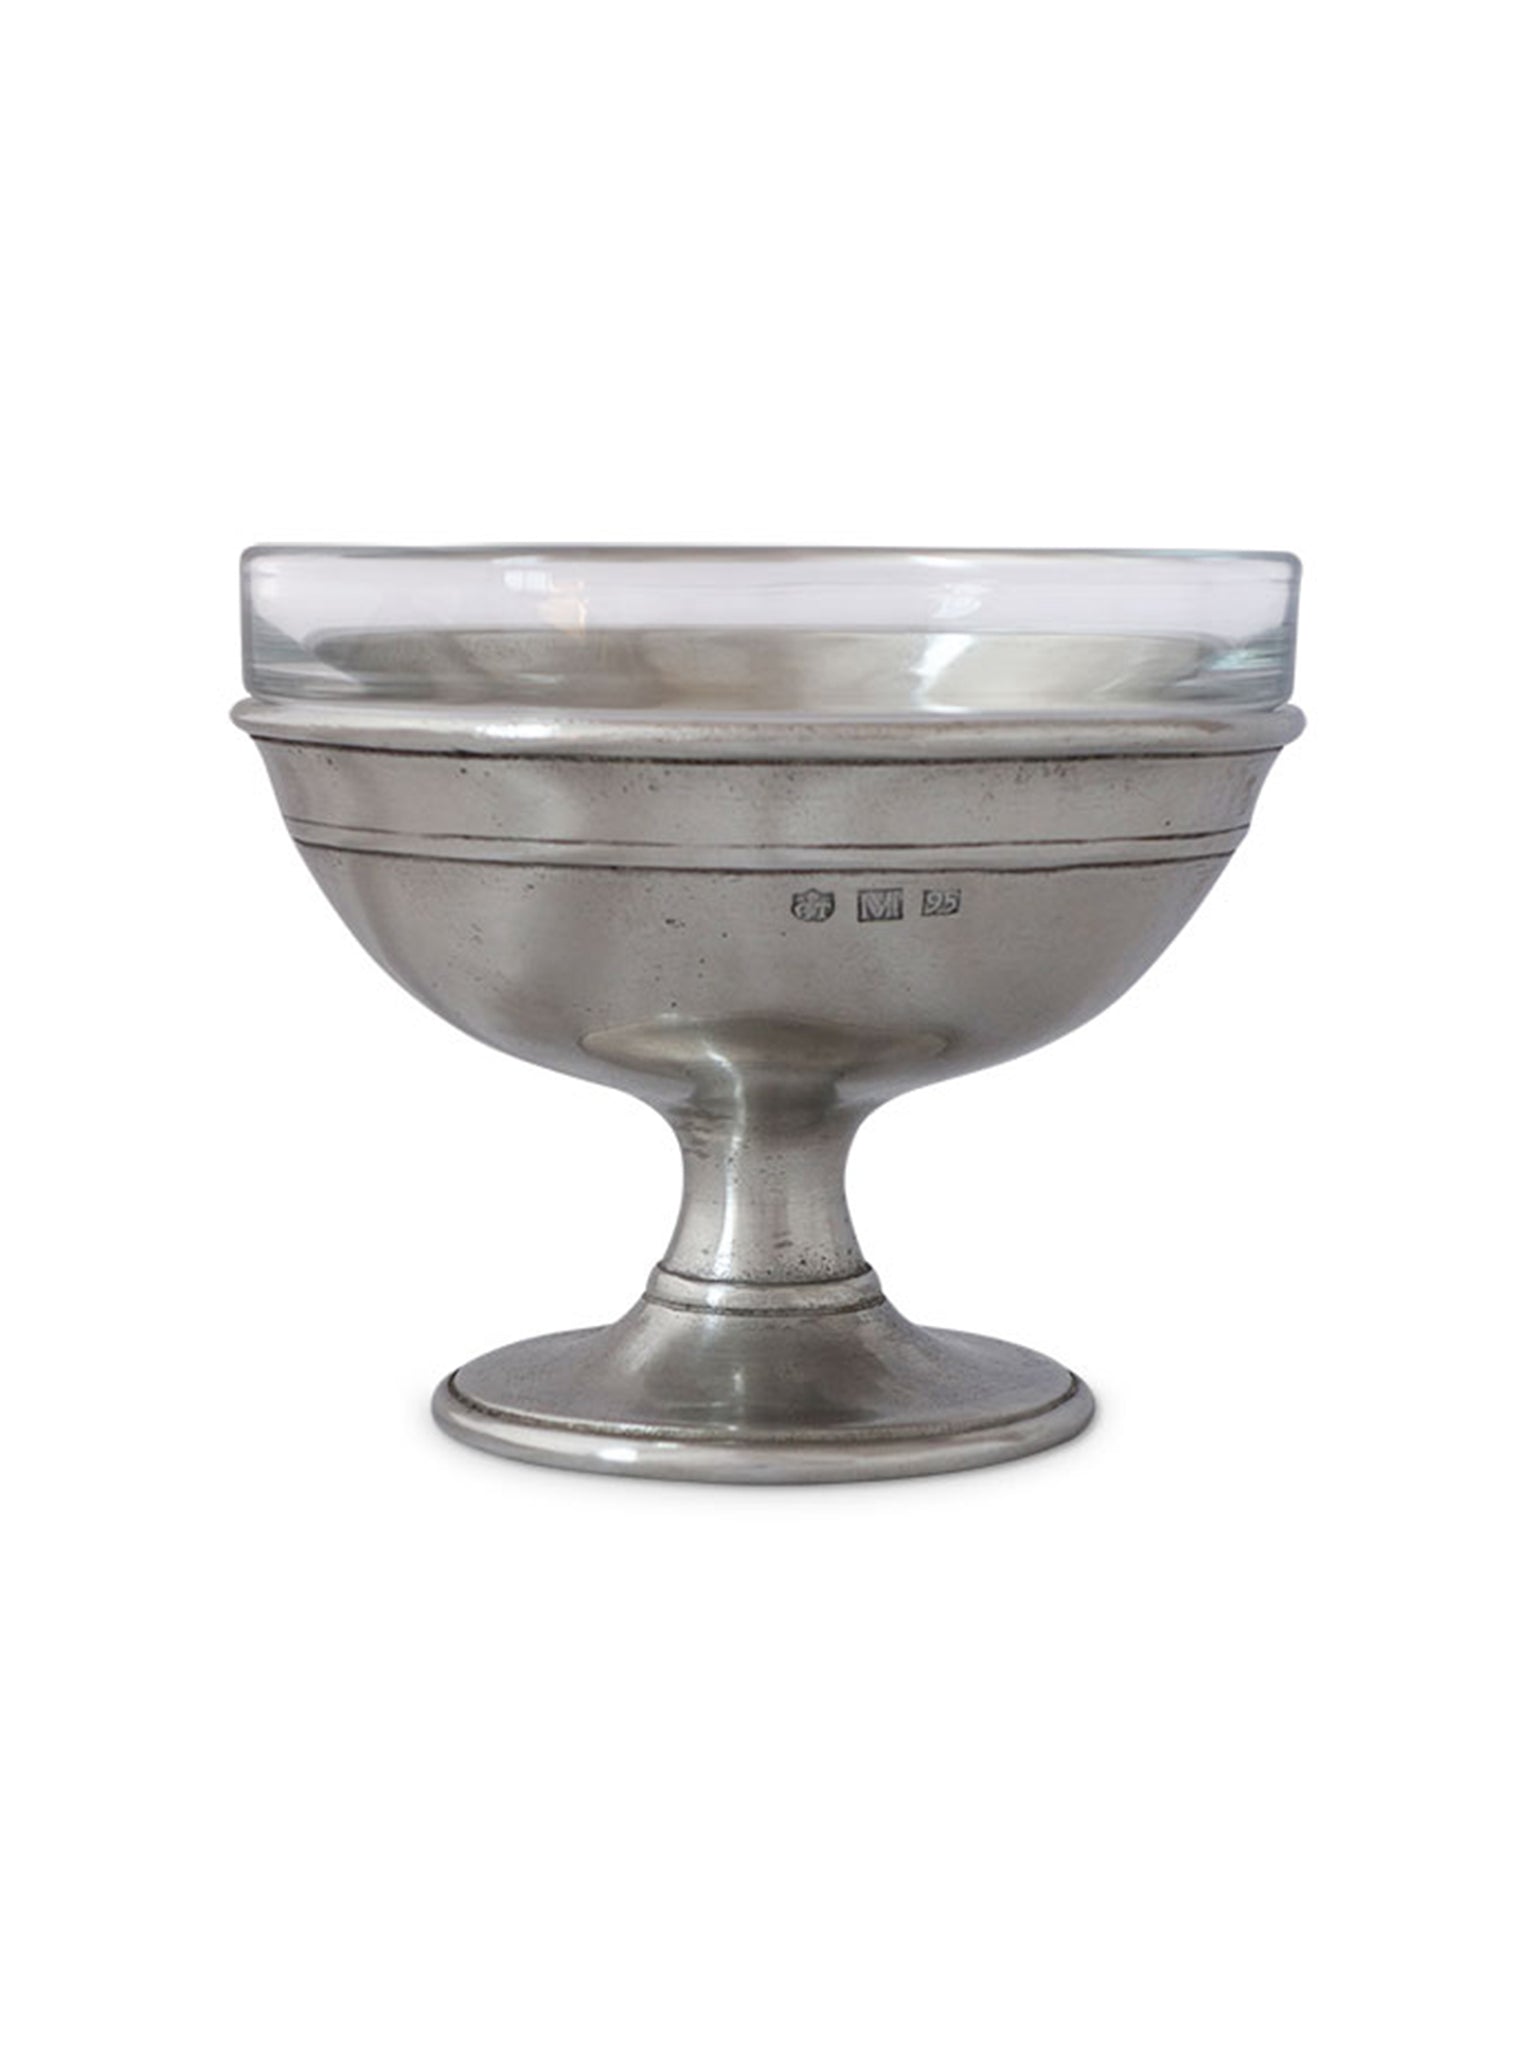 MATCH Pewter Dessert Dish with Glass Insert Weston Table